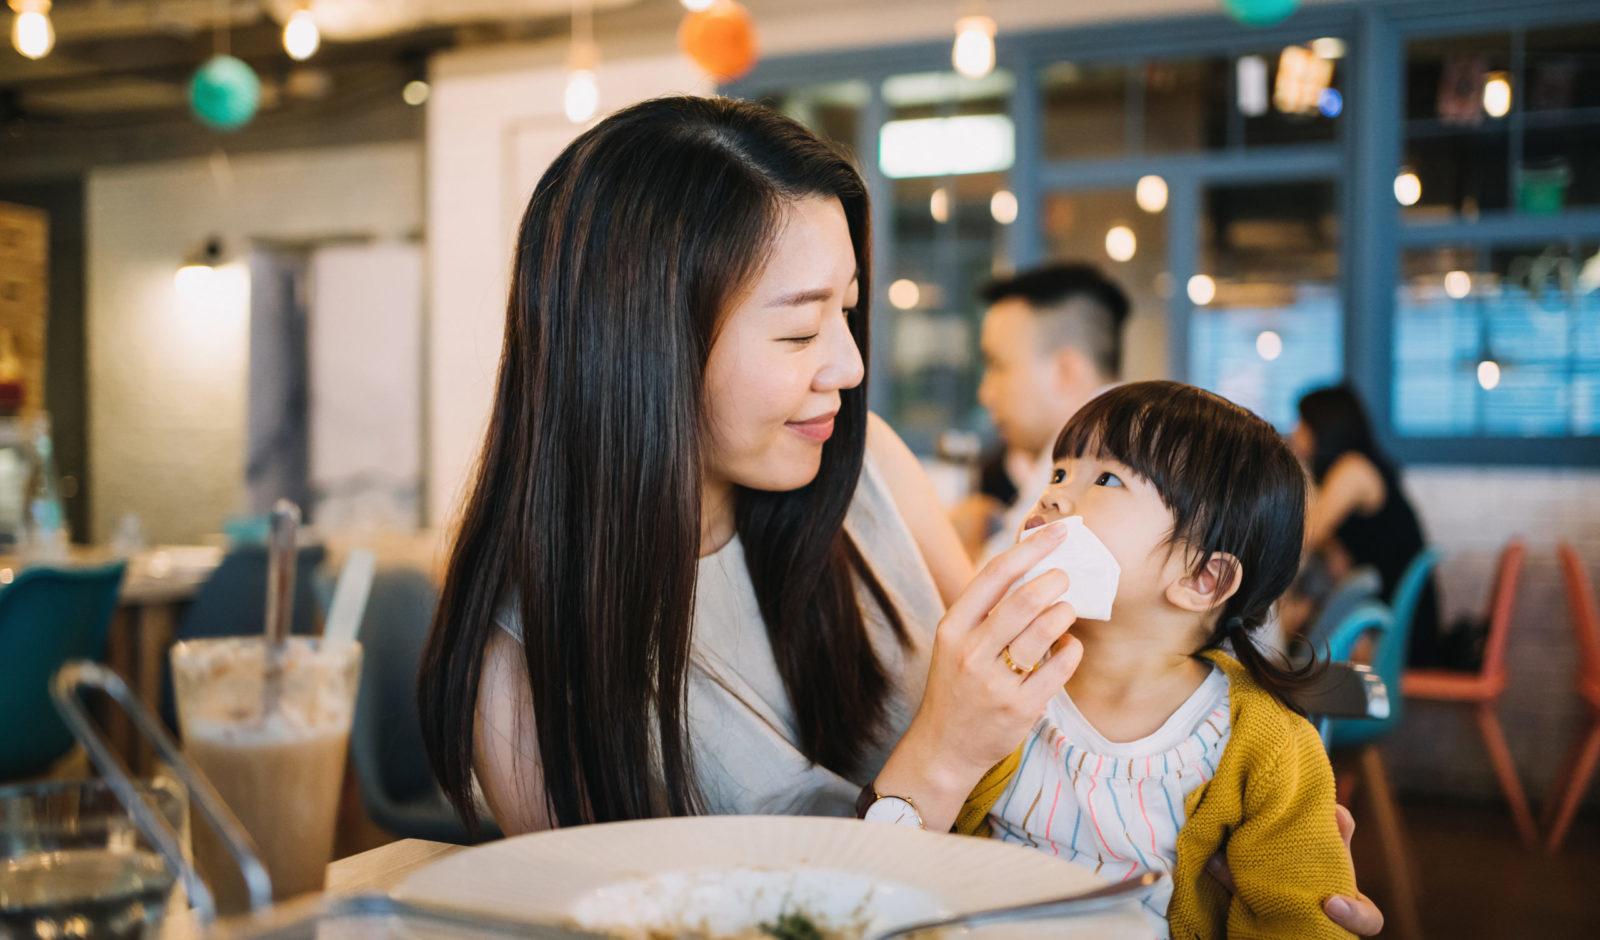 Caring young mother wiping daughter's mouth after meal in a restaurant